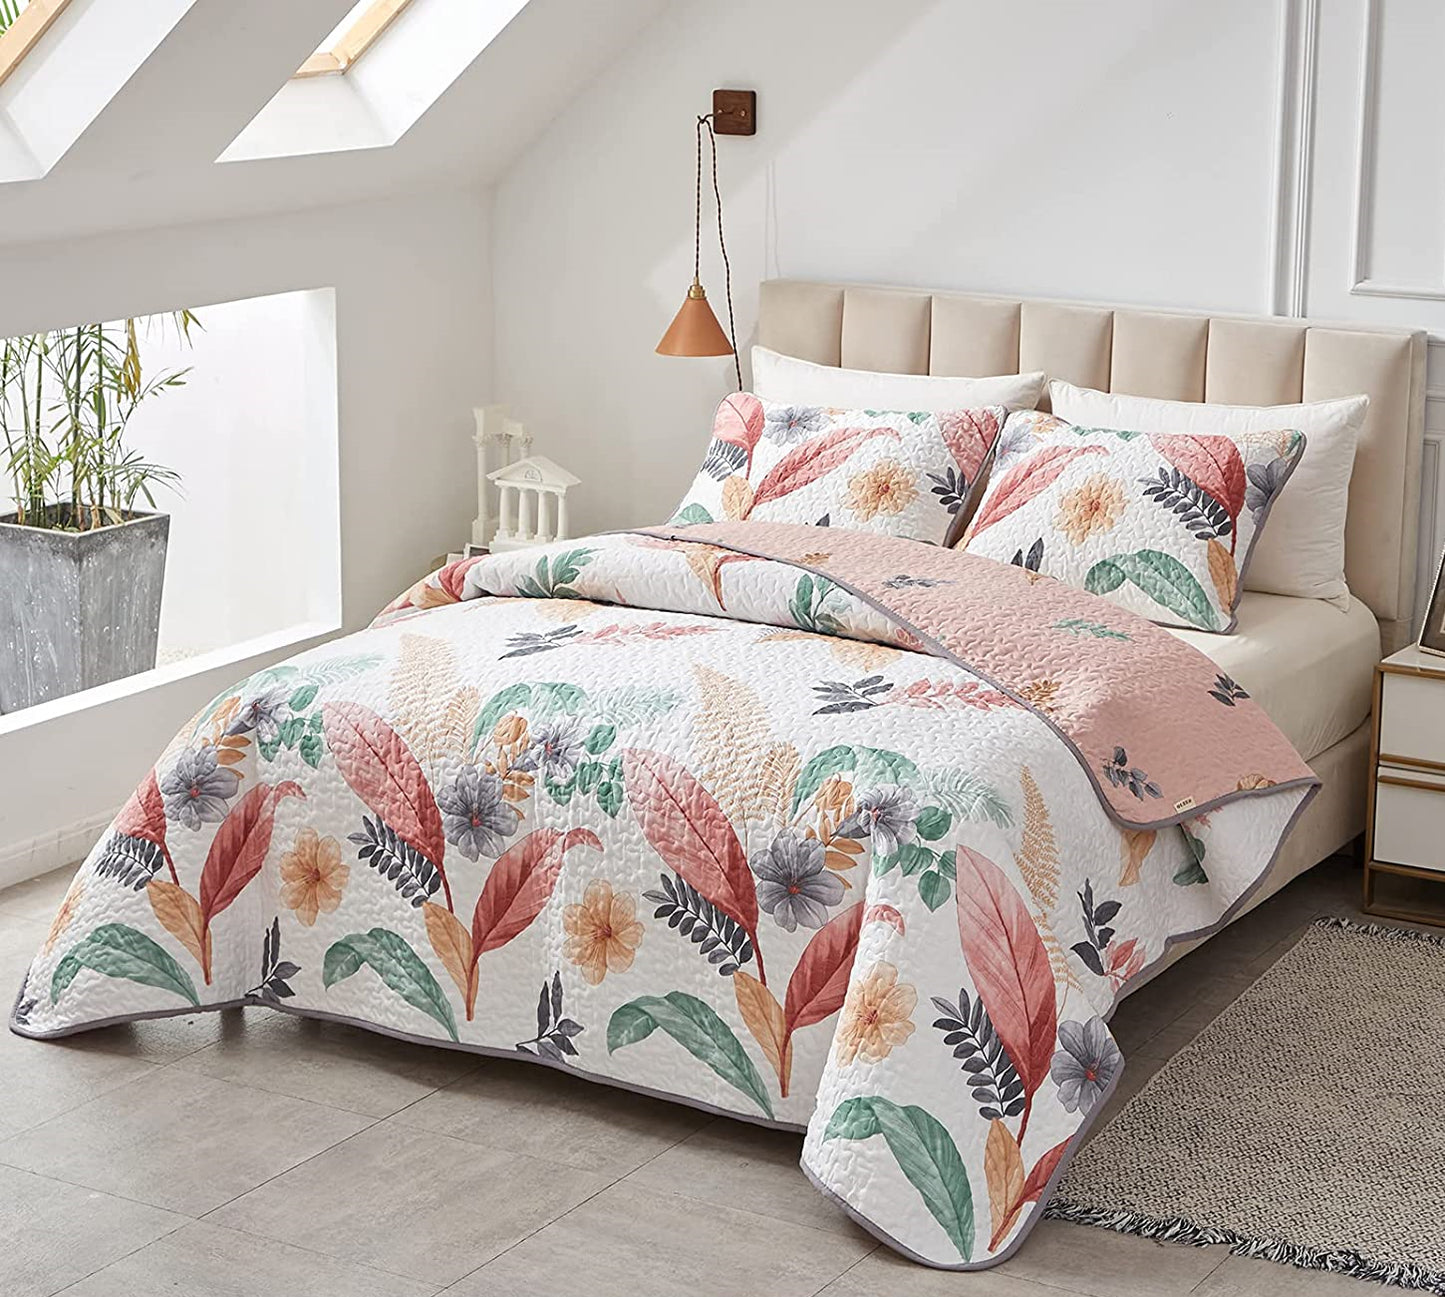 Pure Cotton Pink Leaves Flowers Printed on White Breathable Floral Quilt 3 Pieces Quilt Set with 2 Pillowshams